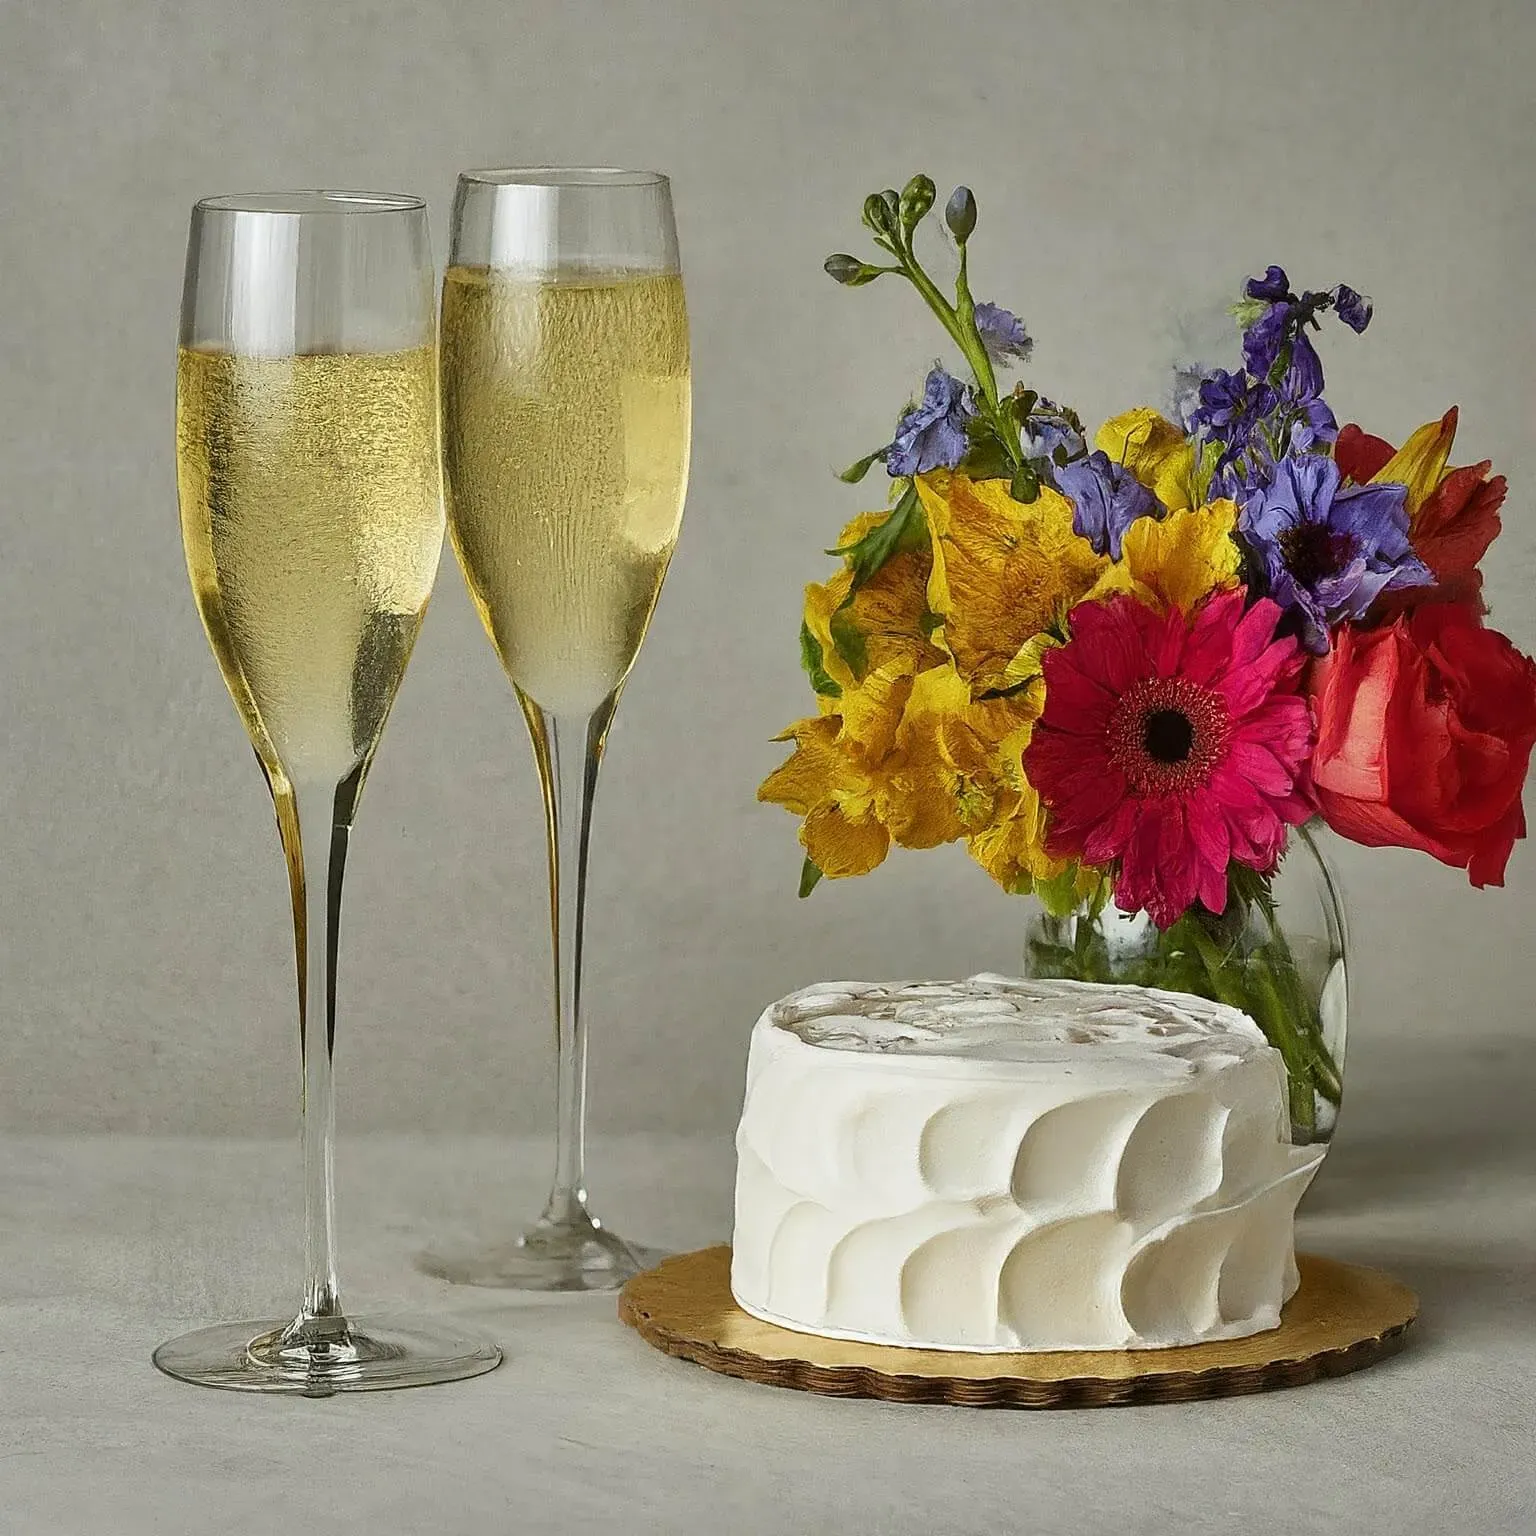 a cake and flowers next to champagne glasses